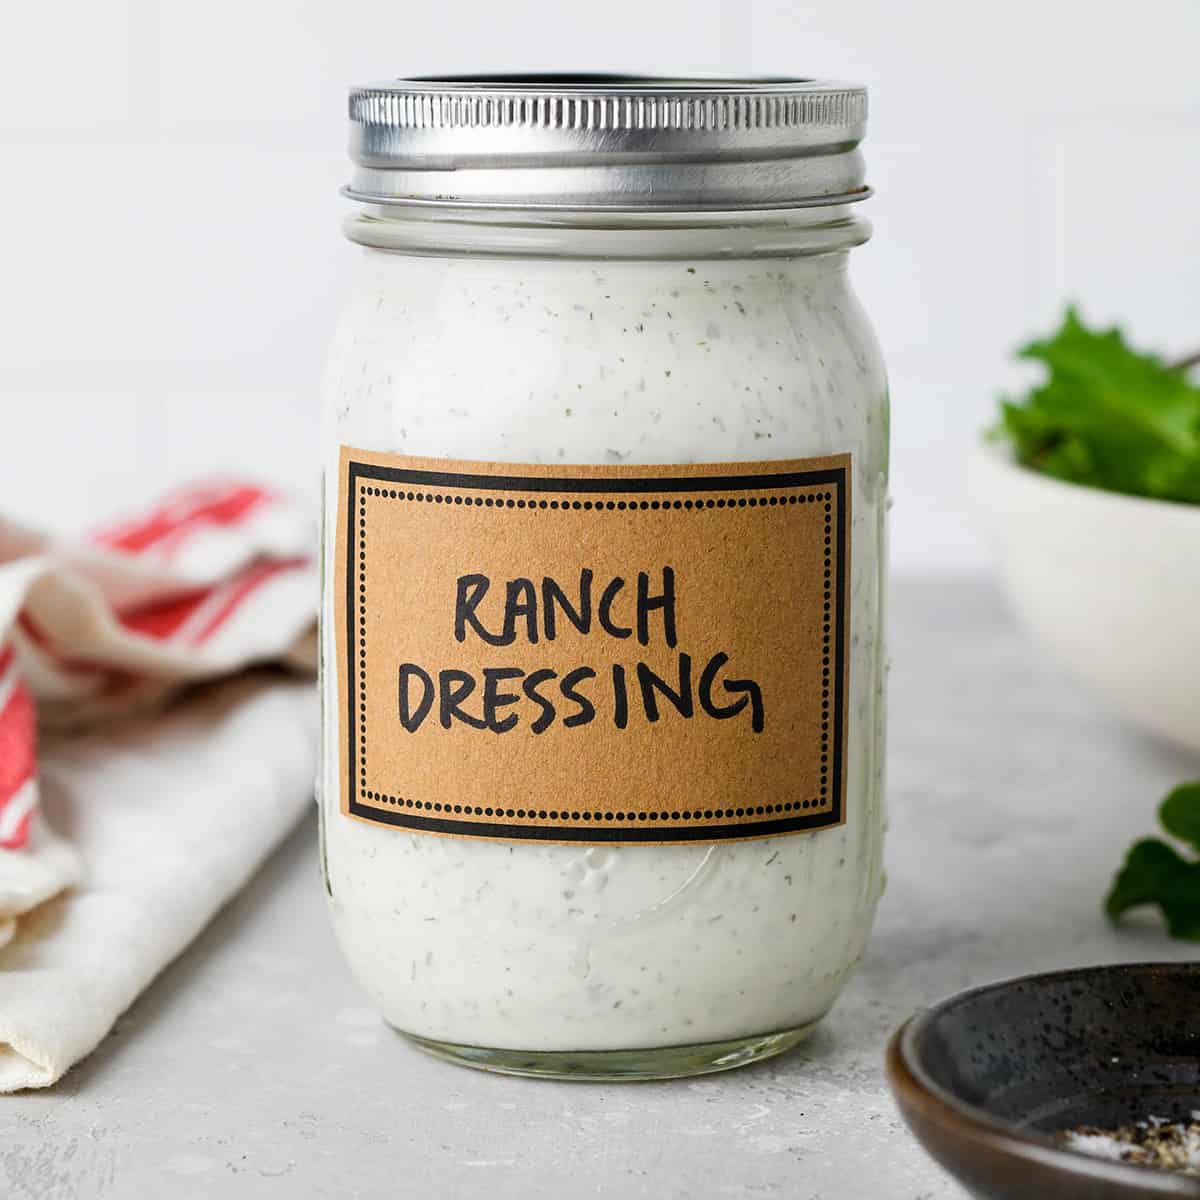 a bottle of ranch dressing made with this Ranch Dressing Mix recipe